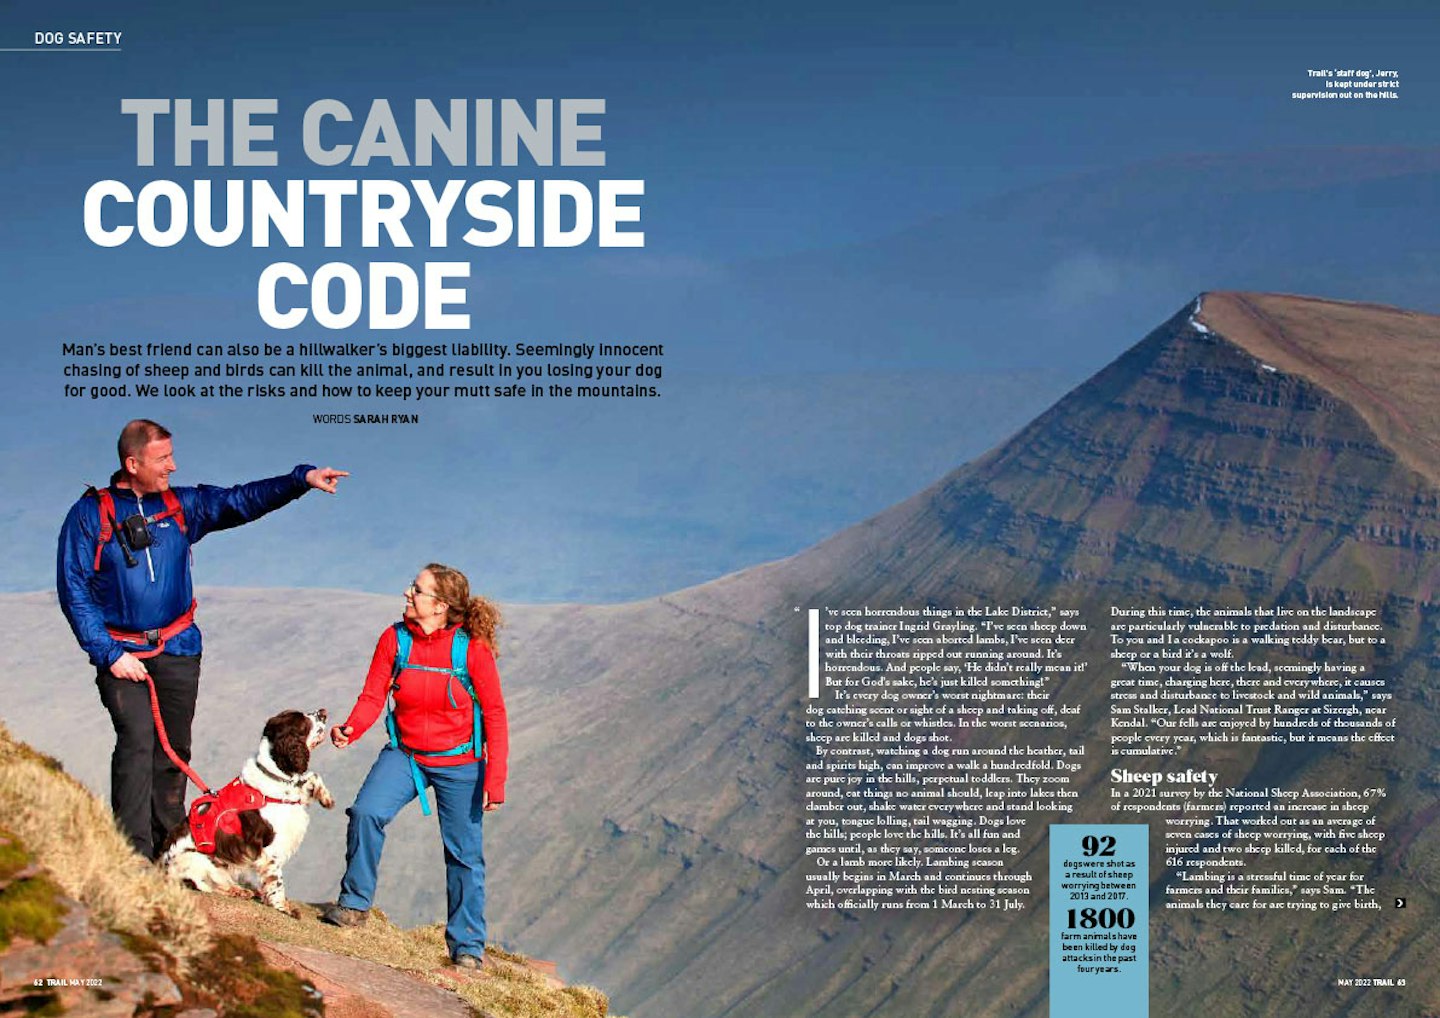 The canine countryside code